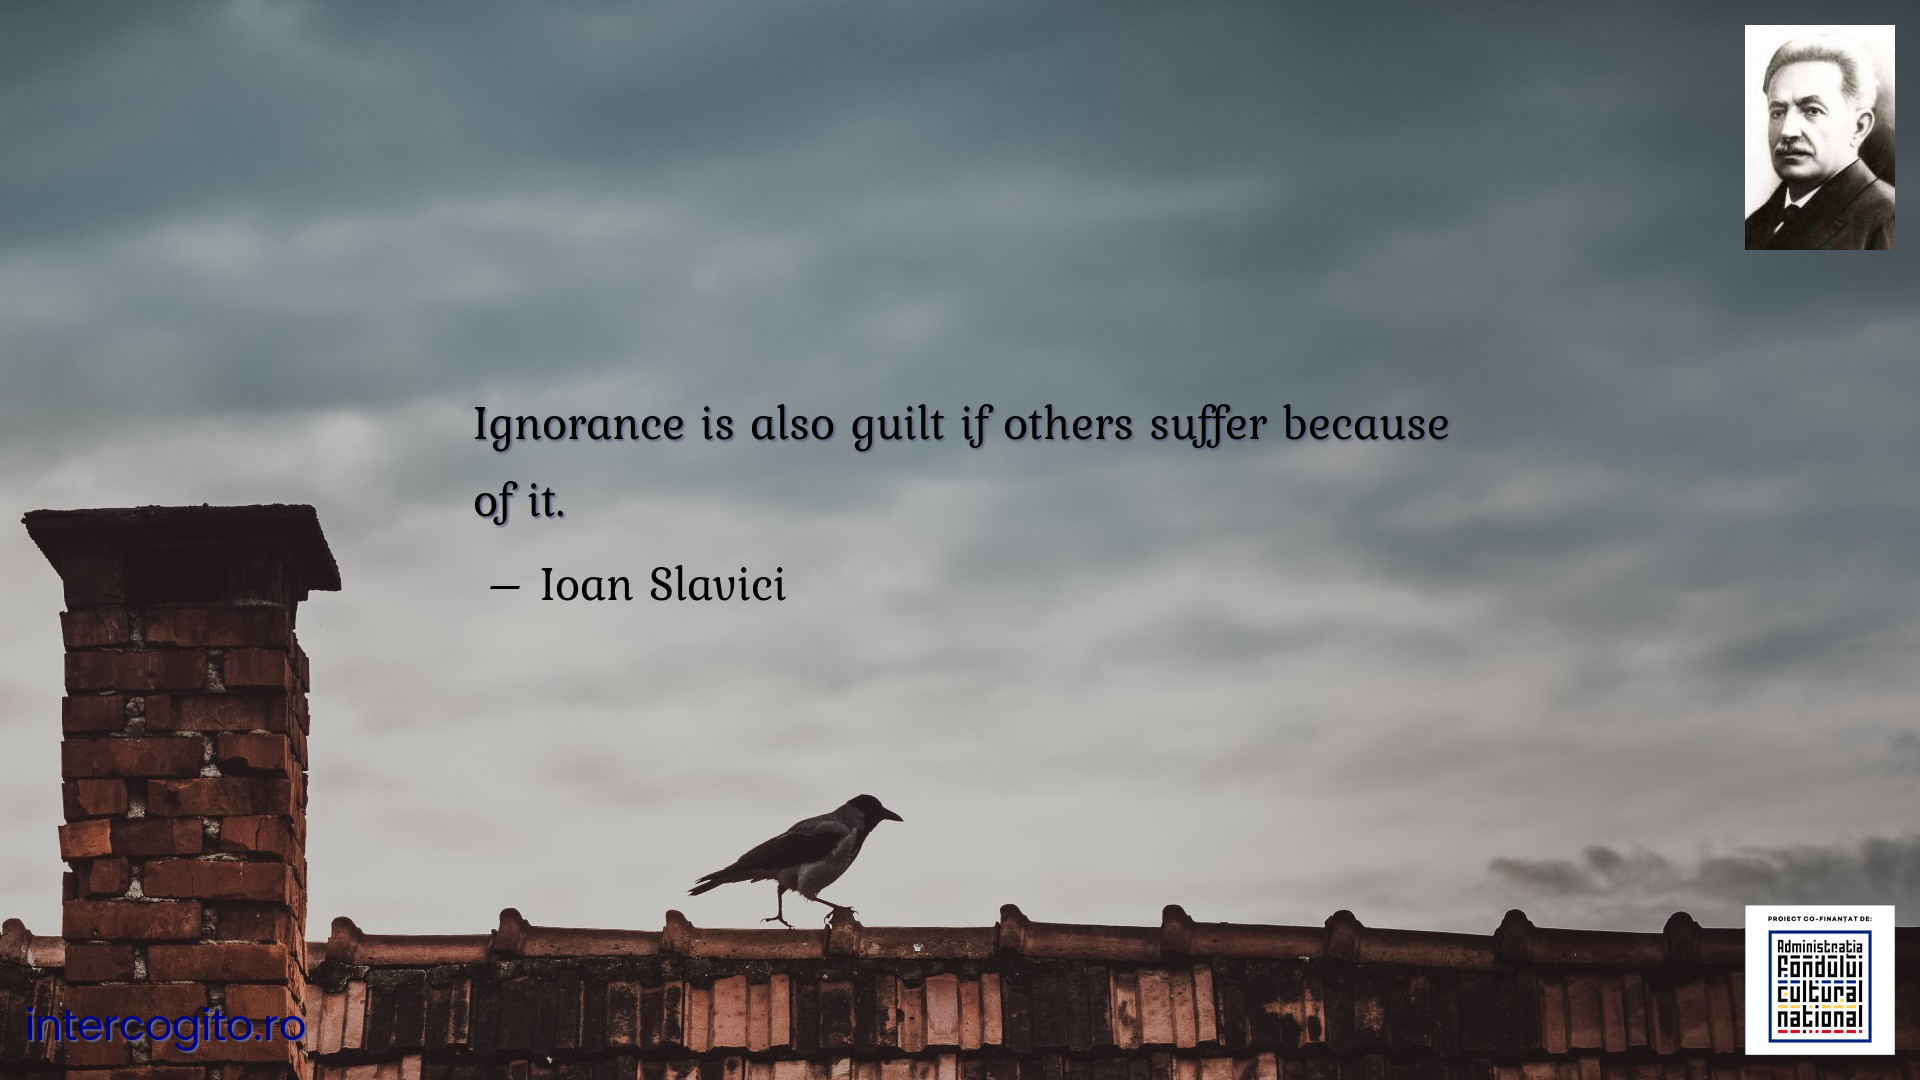 Ignorance is also guilt if others suffer because of it.